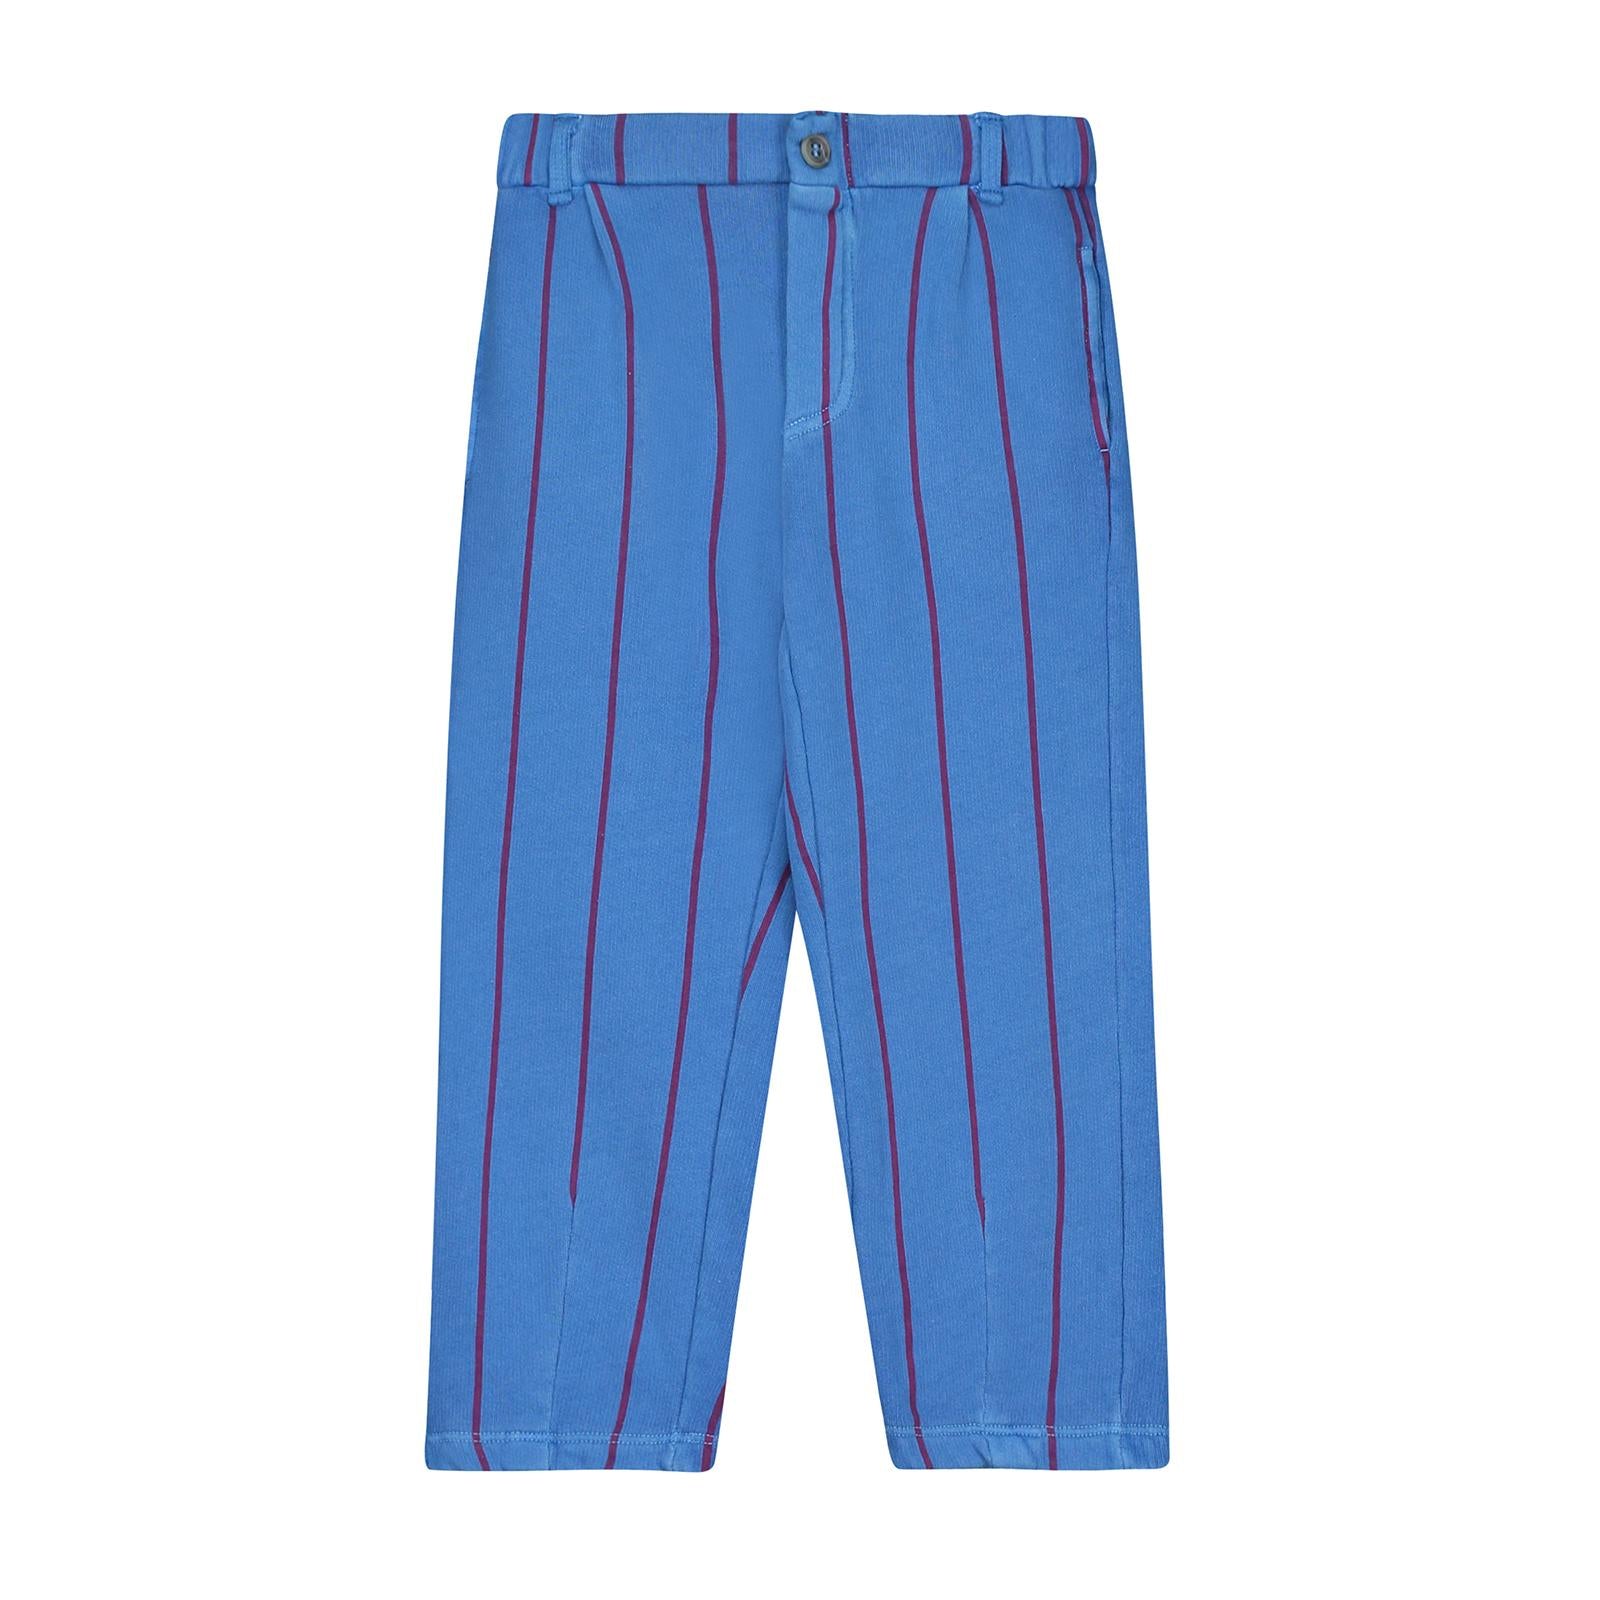 Blue Striped Trousers with White Linen Shirt | Hockerty